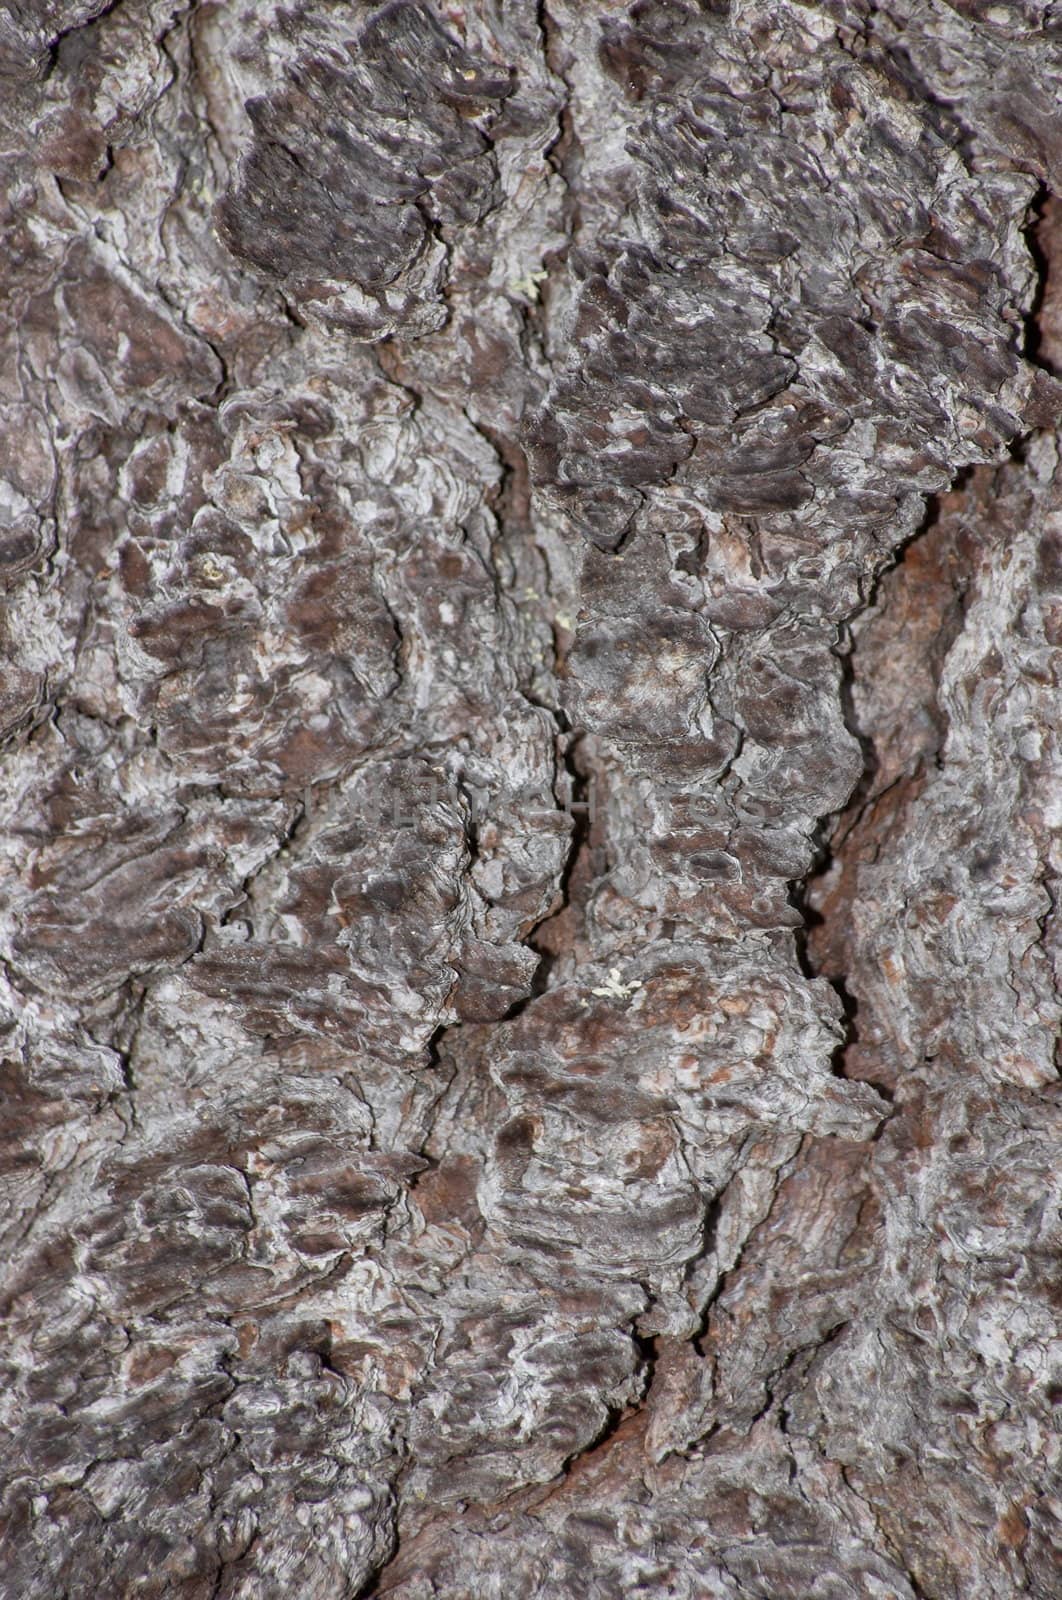 The connatural texture representing a cortex of a coniferous tree